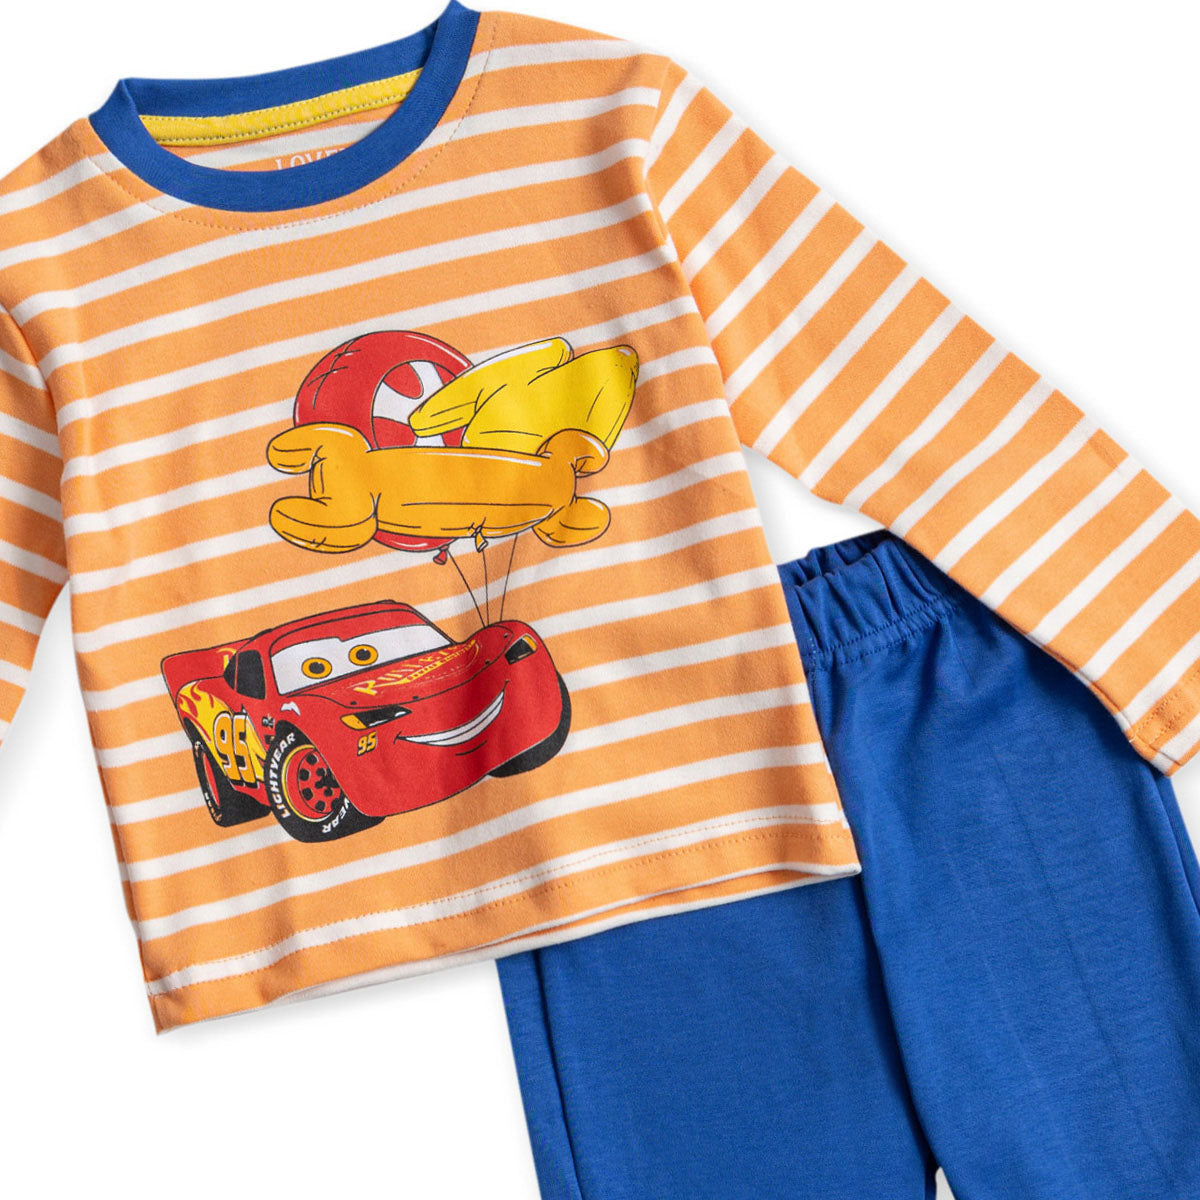 orange and white stripped shirt with cars and blue pants pyjama